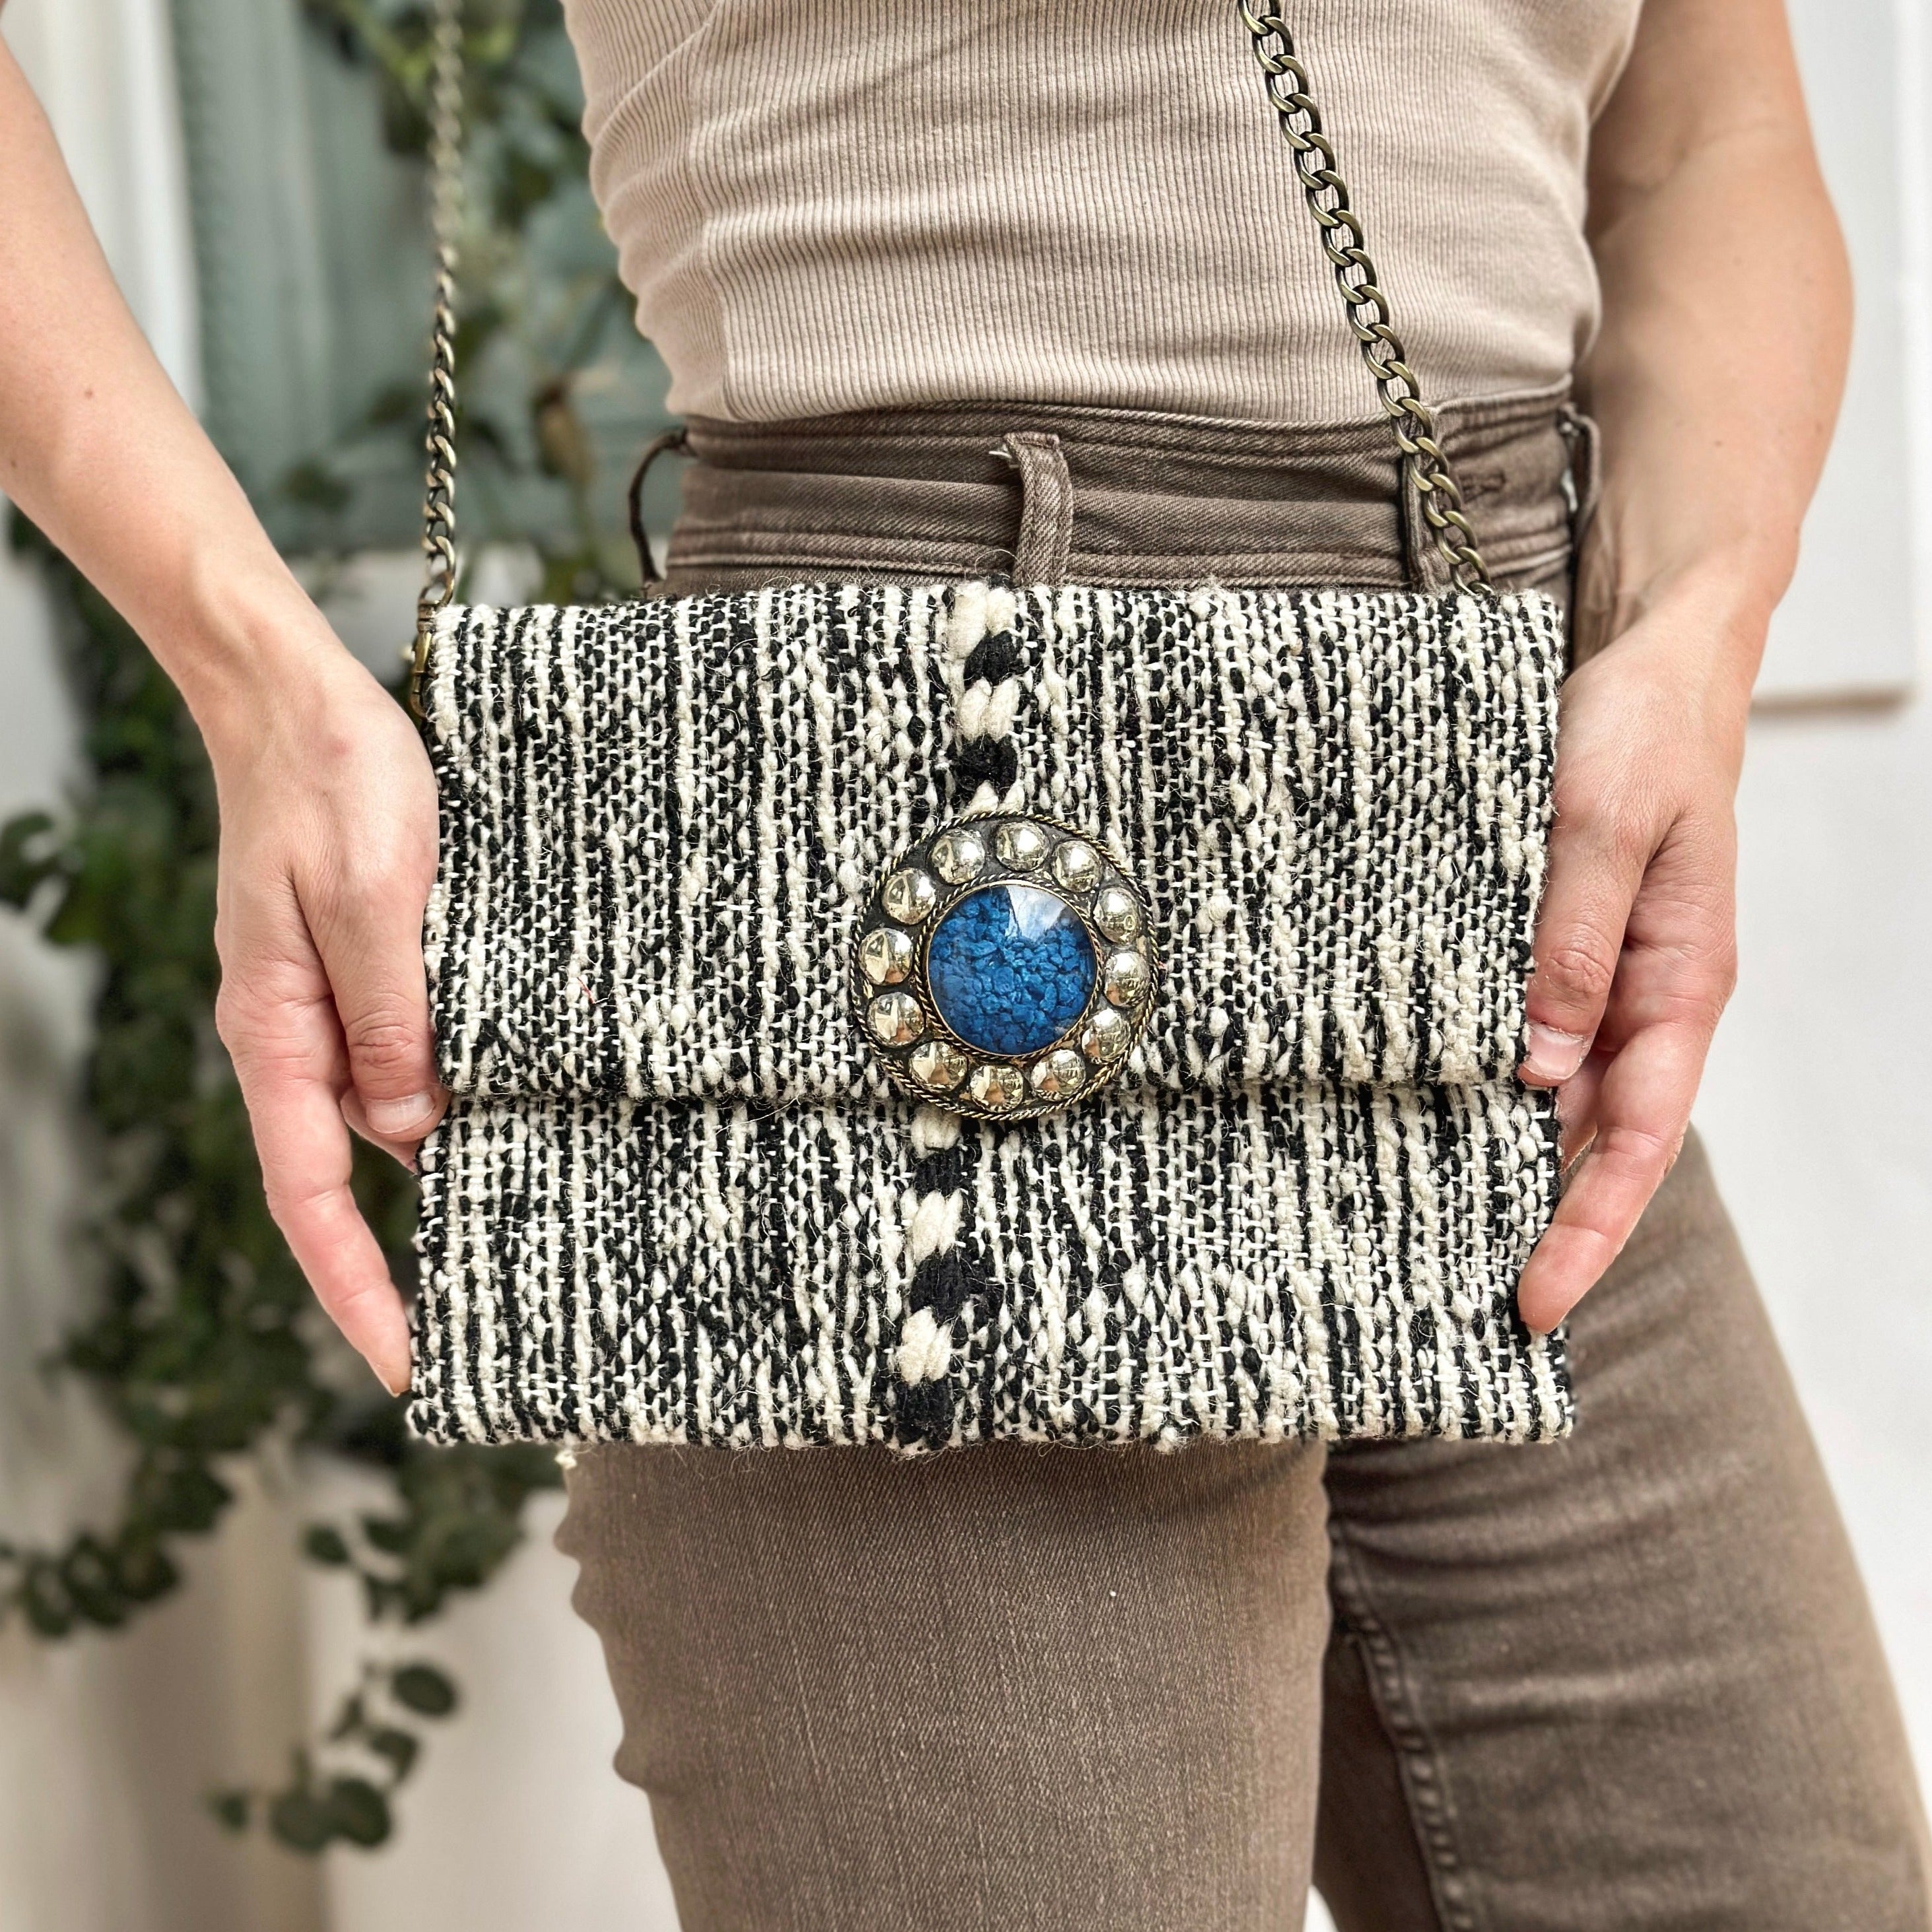 Moonstone Upcycled Clutch